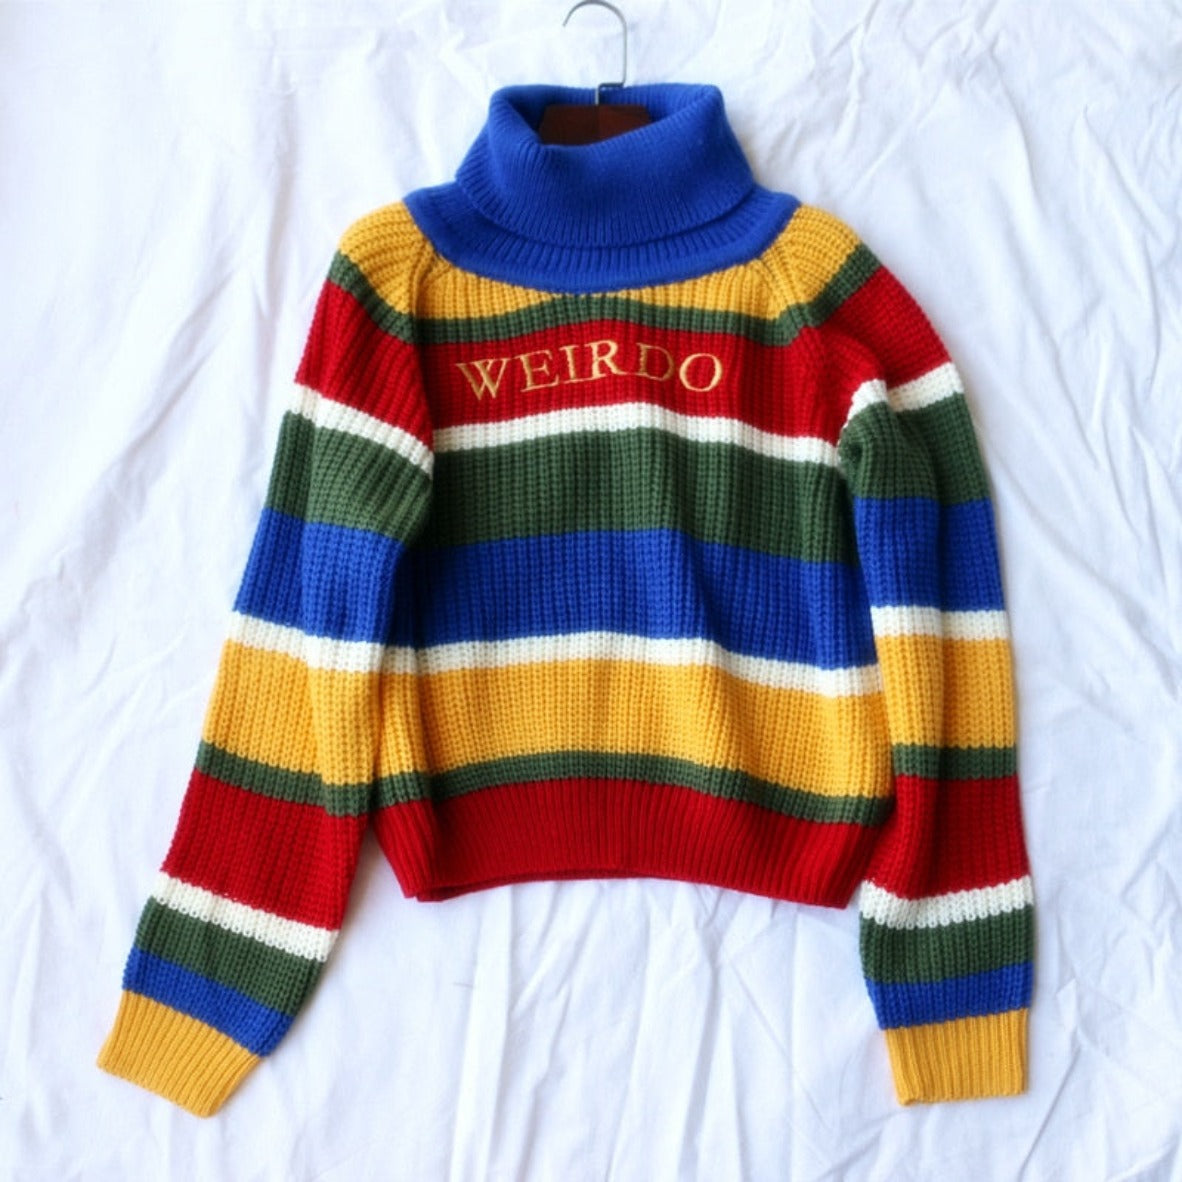 Embroided Weirdo Oversized Knitted Sweater